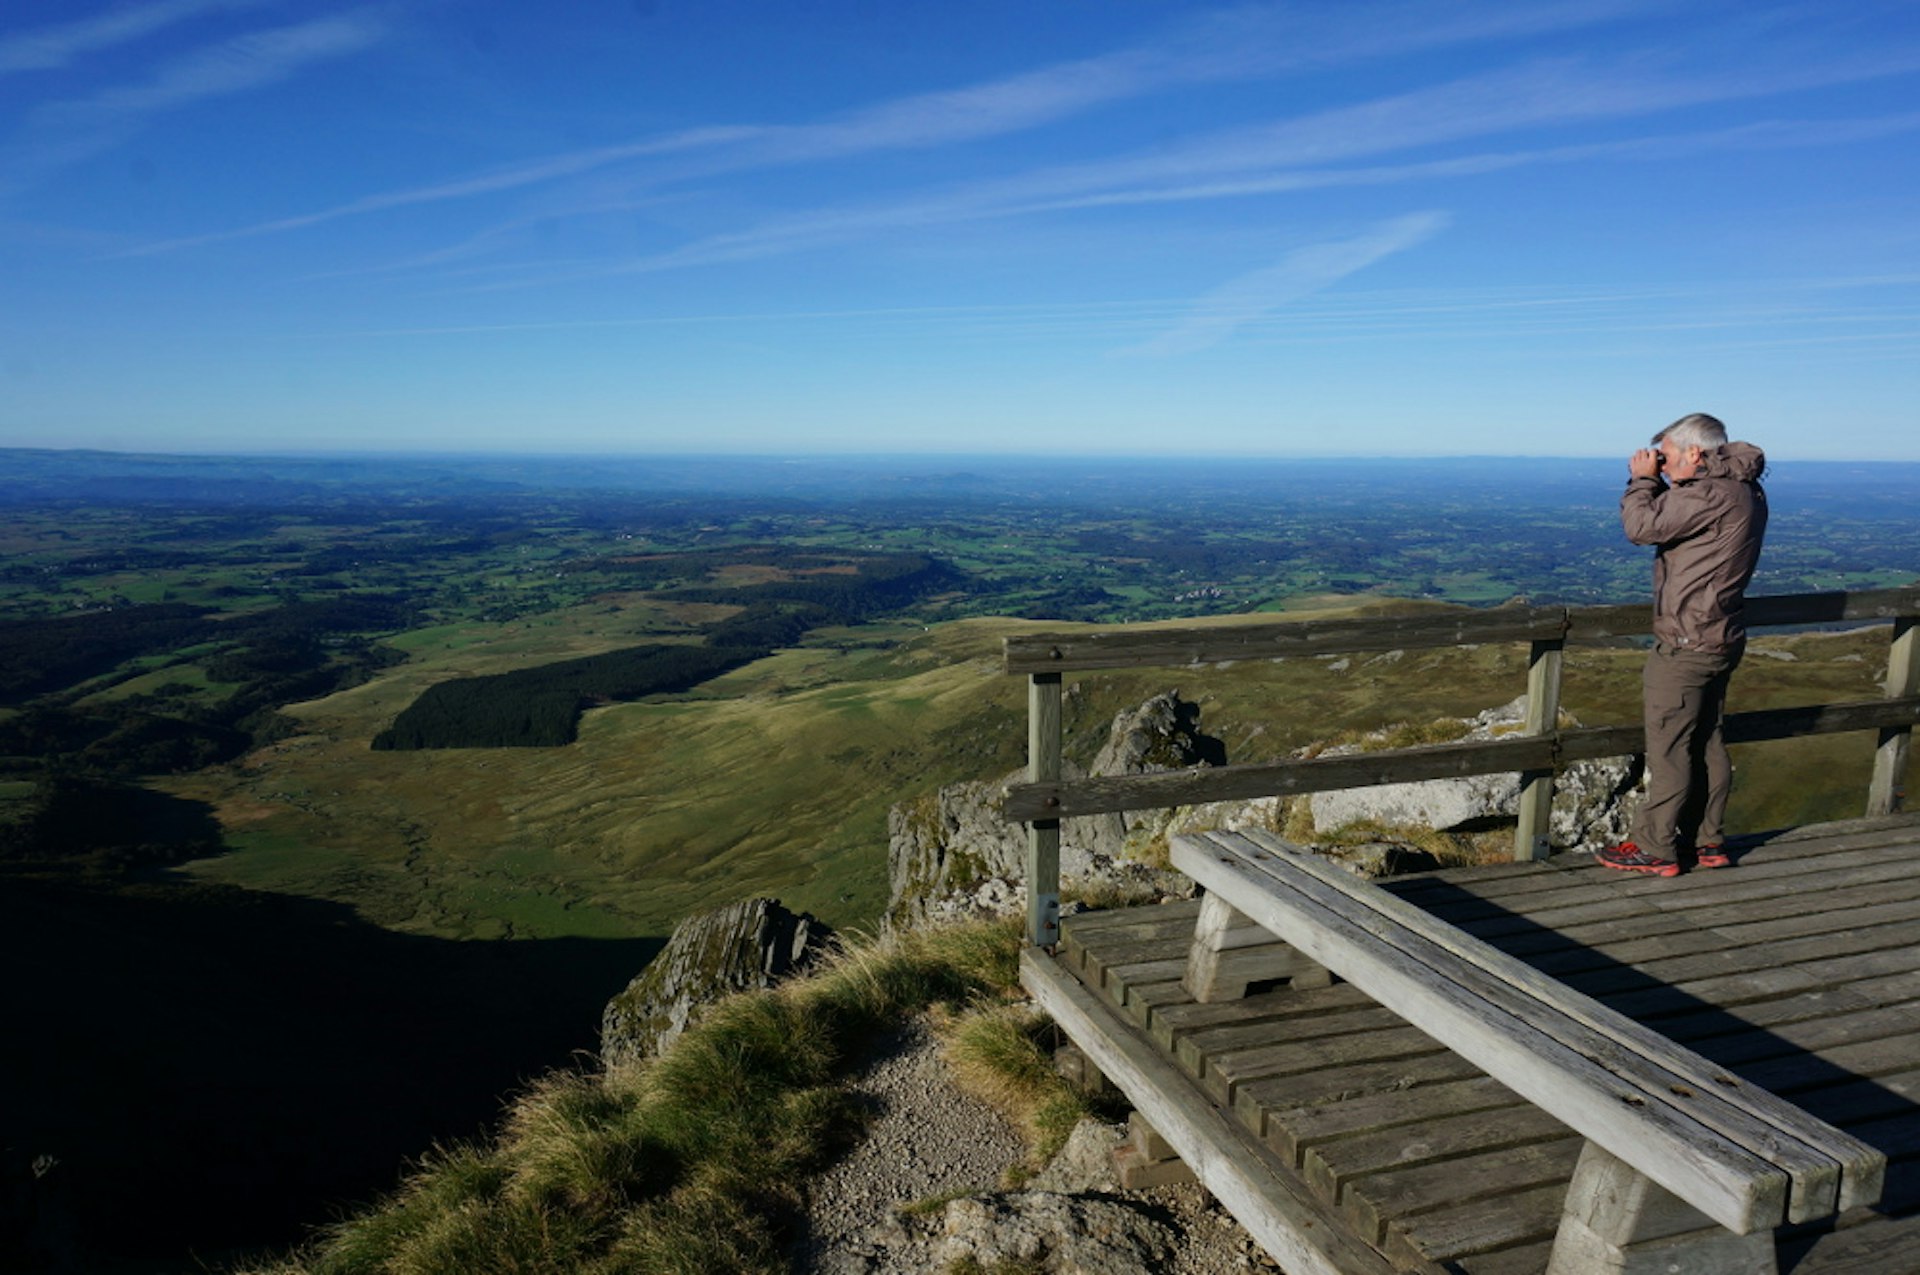 Hiking trails around the Sancy have plenty of vantage points to spot mountain goats, buzzards and other local wildlife. Image by Anita Isalska / Lonely Planet